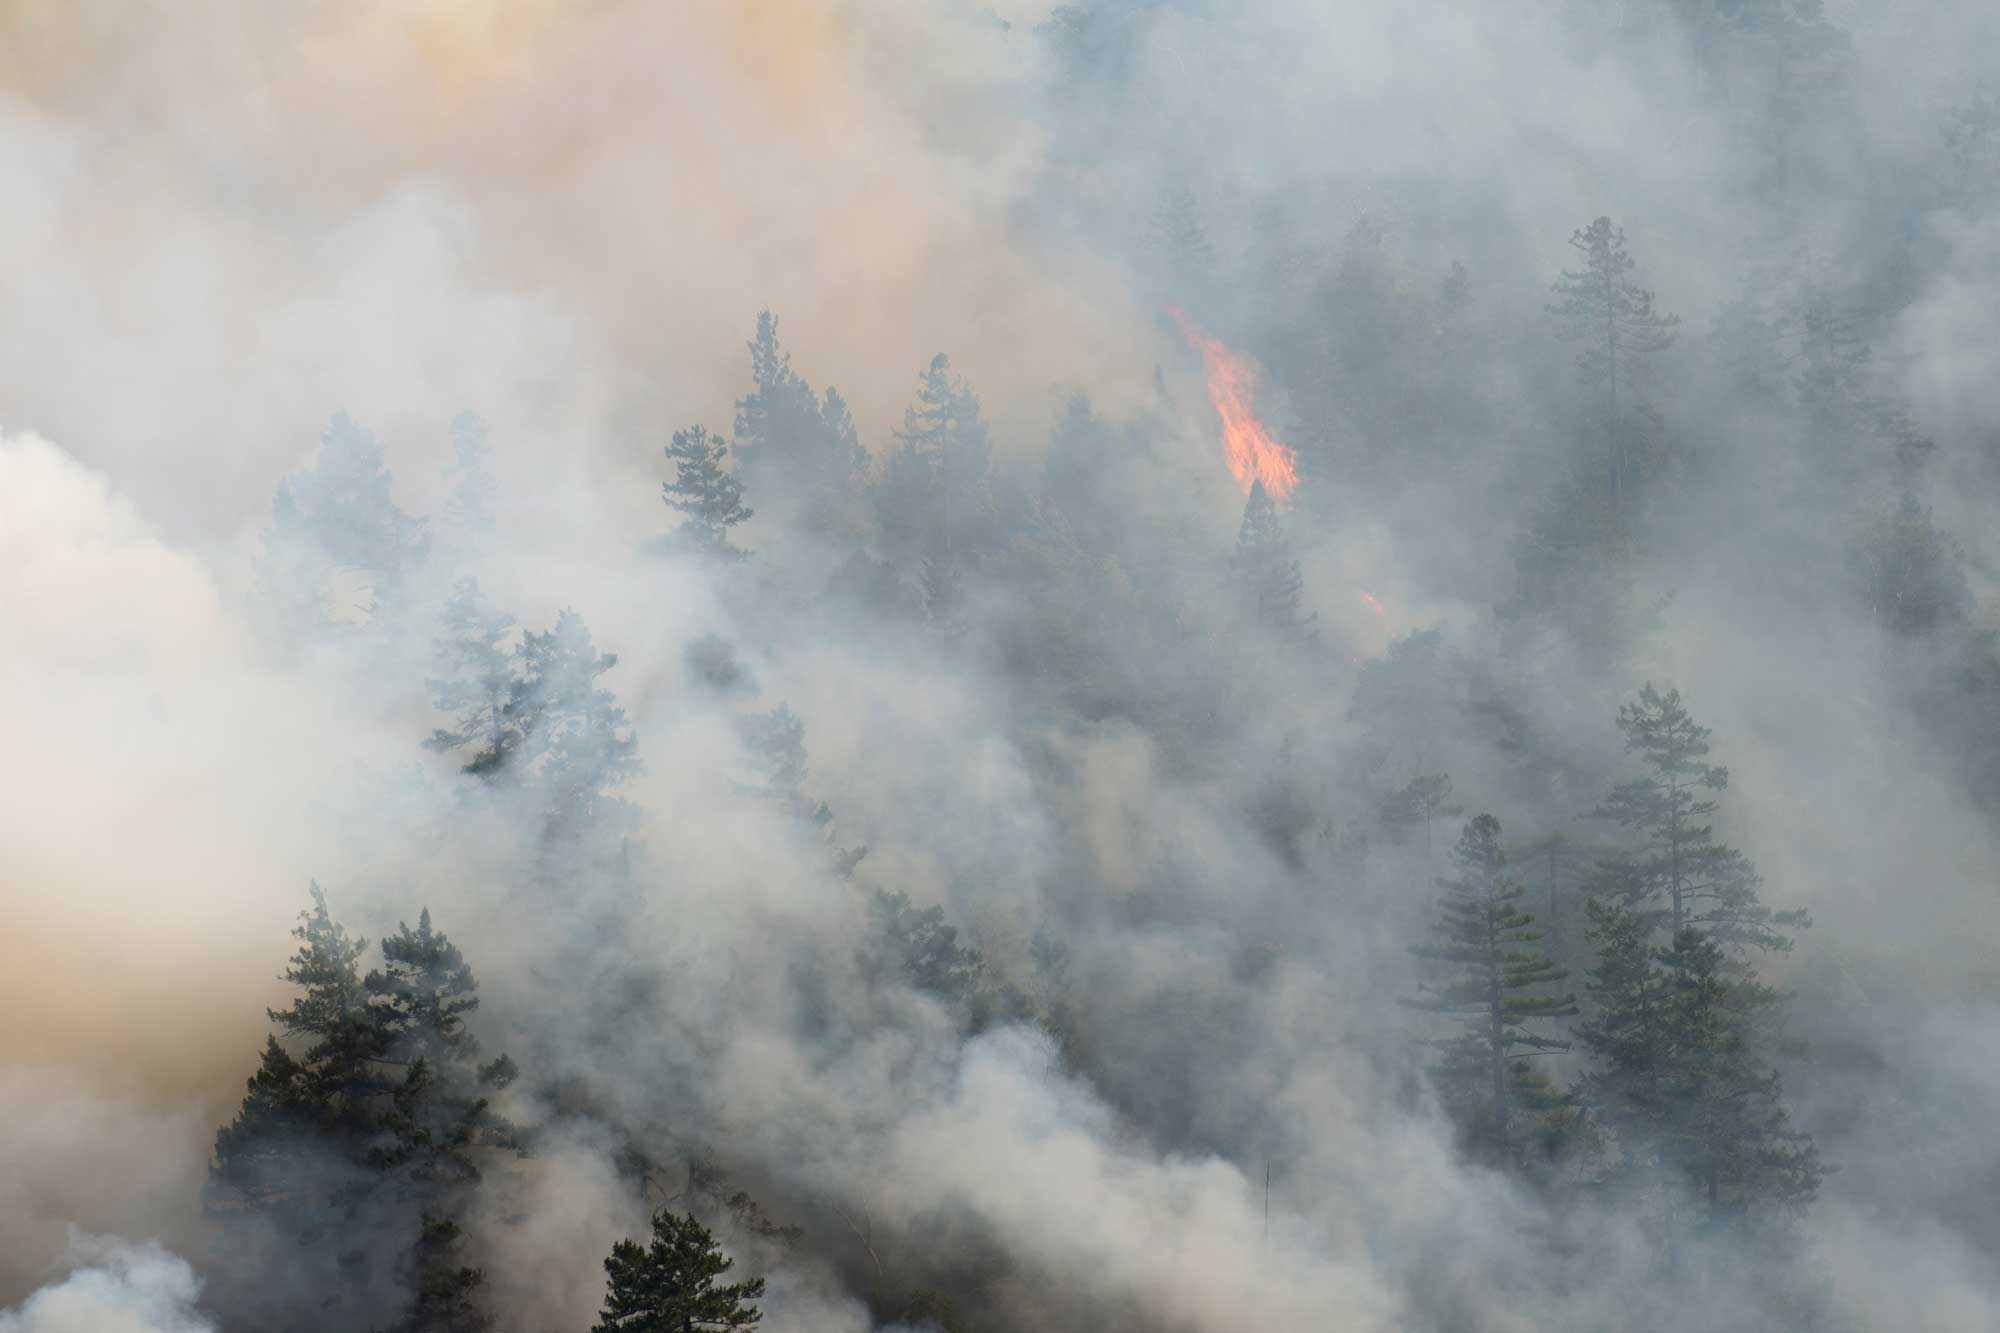 Ask an Expert: How Dangerous is Wildfire Smoke?